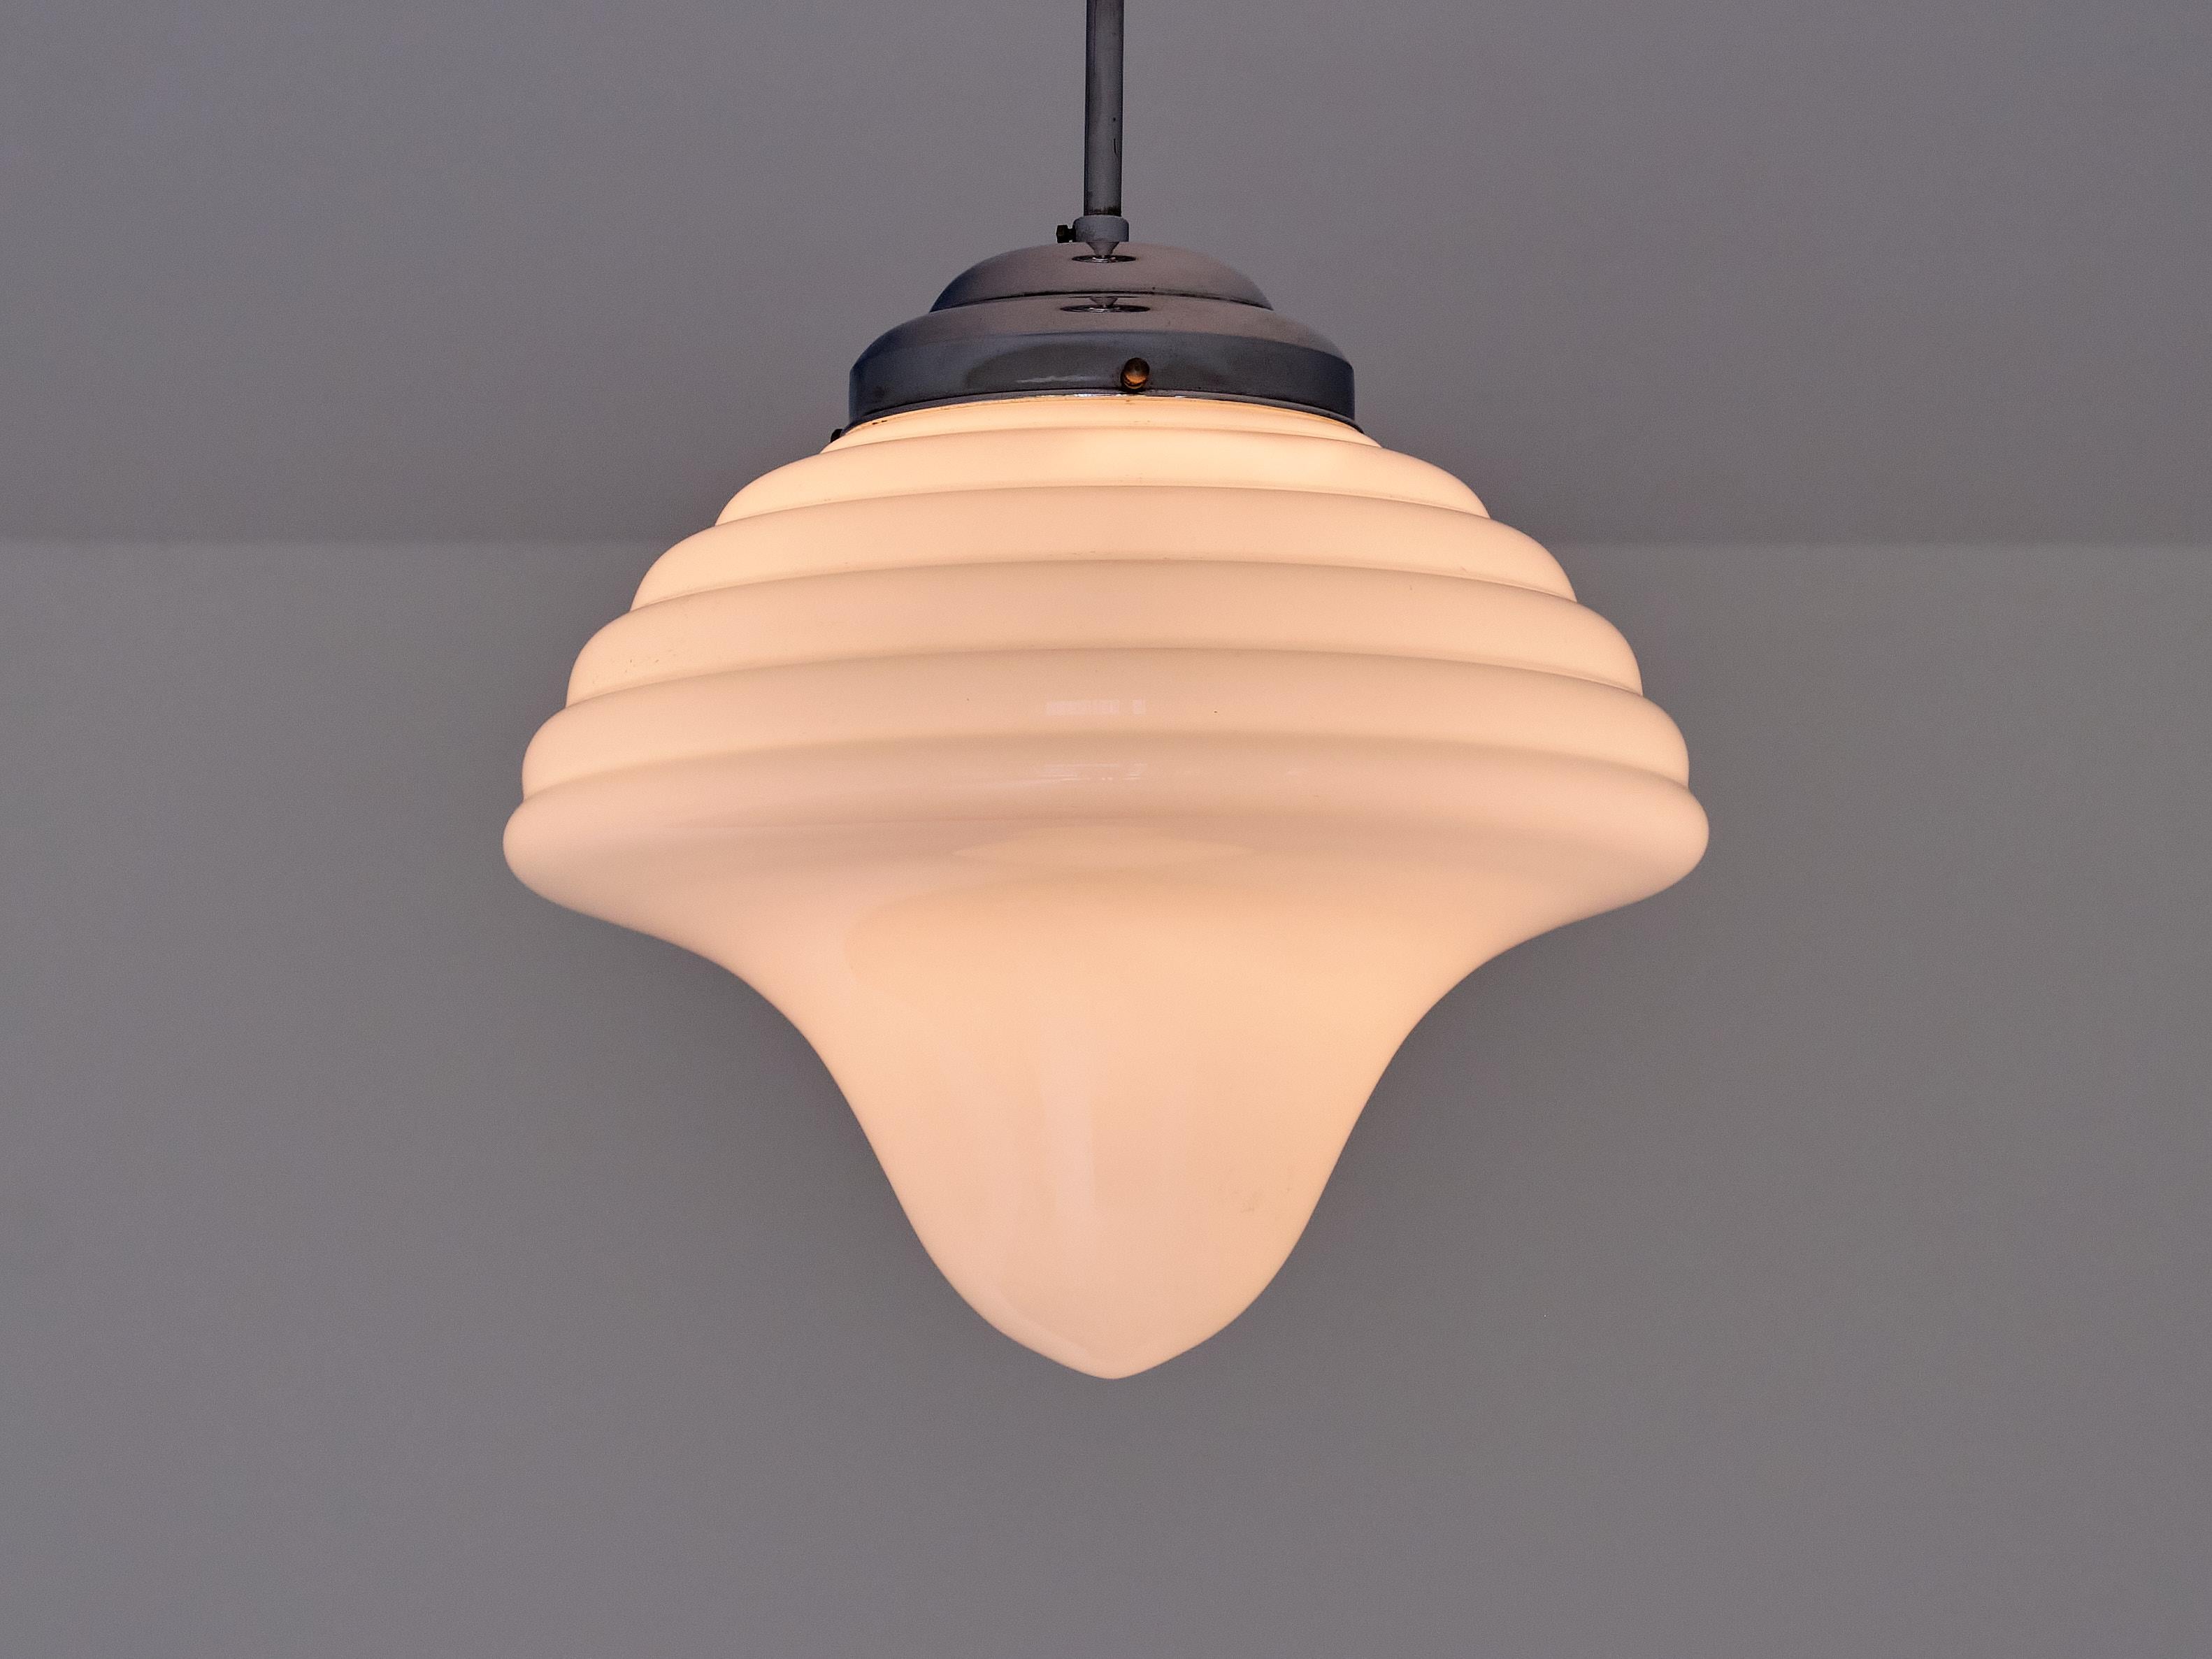 Dutch Art Deco Drop Shaped Pendant Light in Opal Glass and Nickel, Netherlands, 1930s For Sale